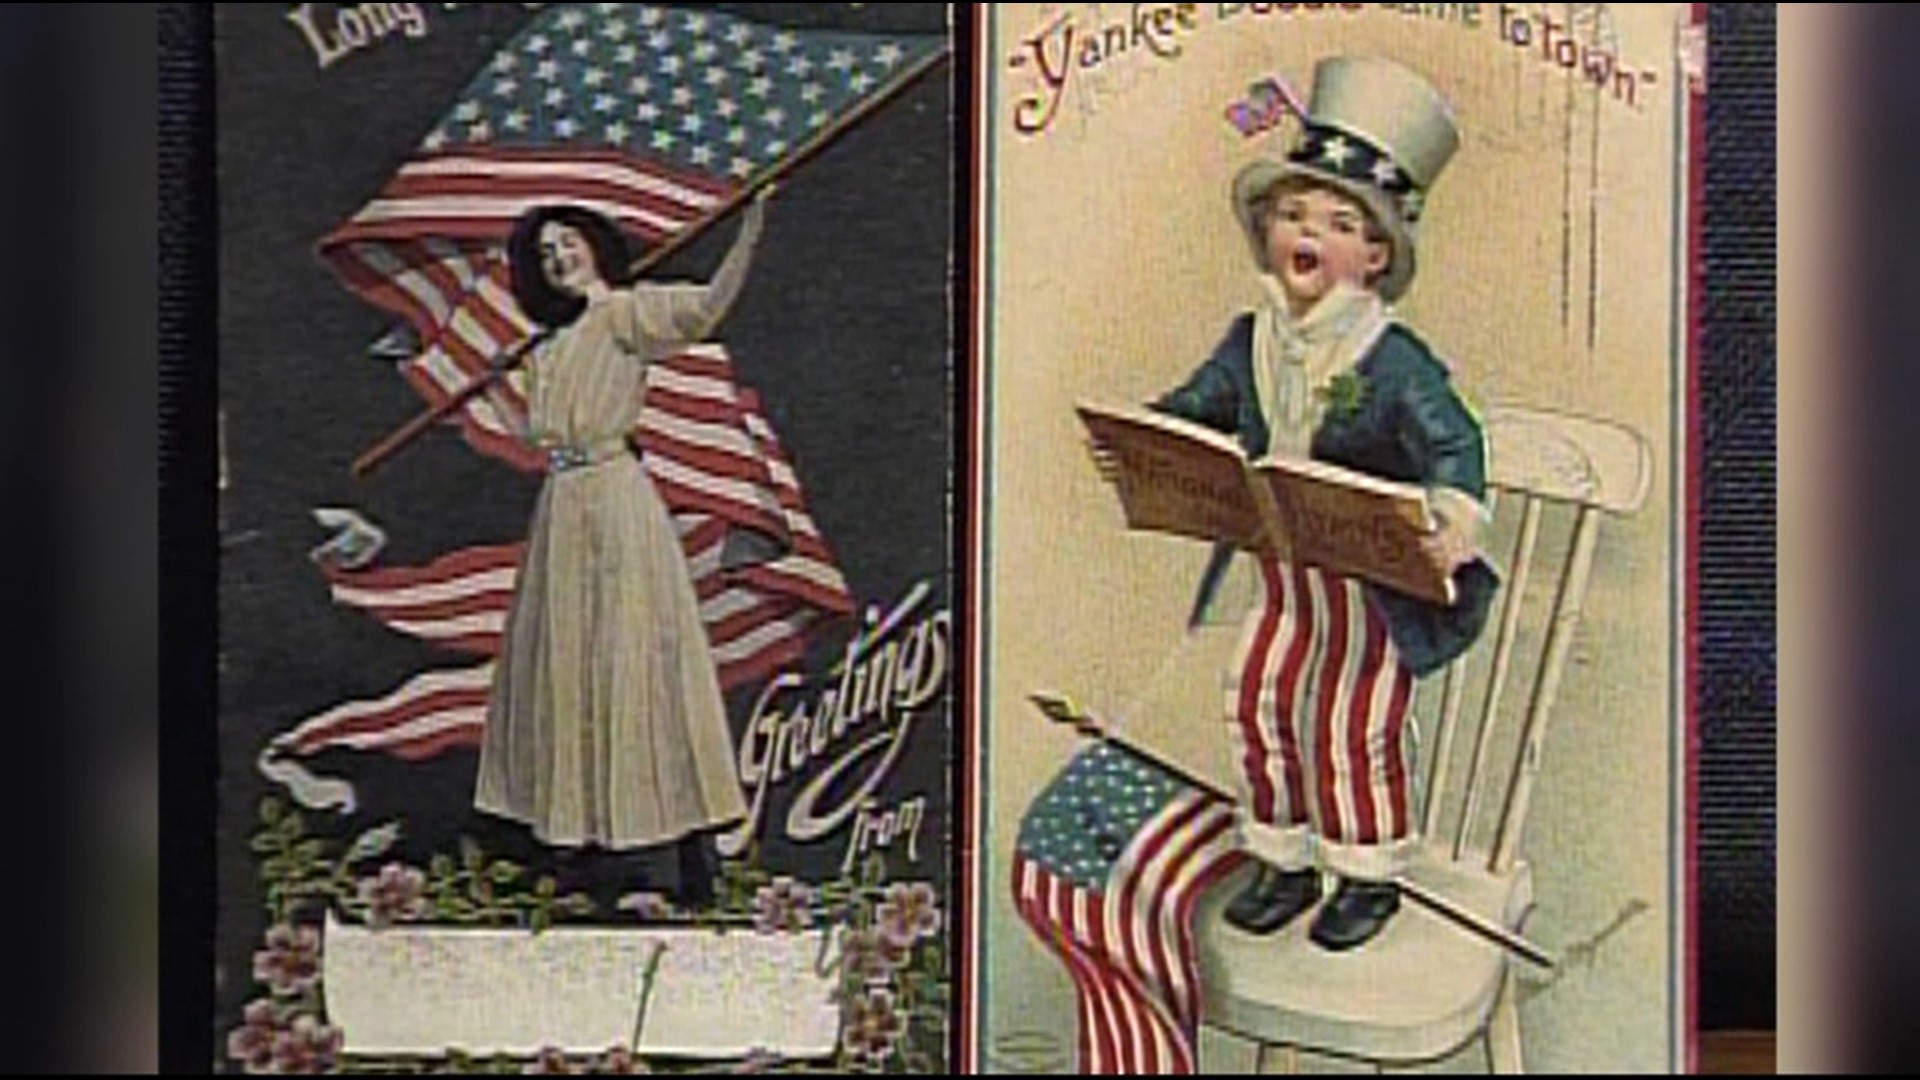 Mike Stevens takes a look at some of the postcards that go back as far as 90 years ago.